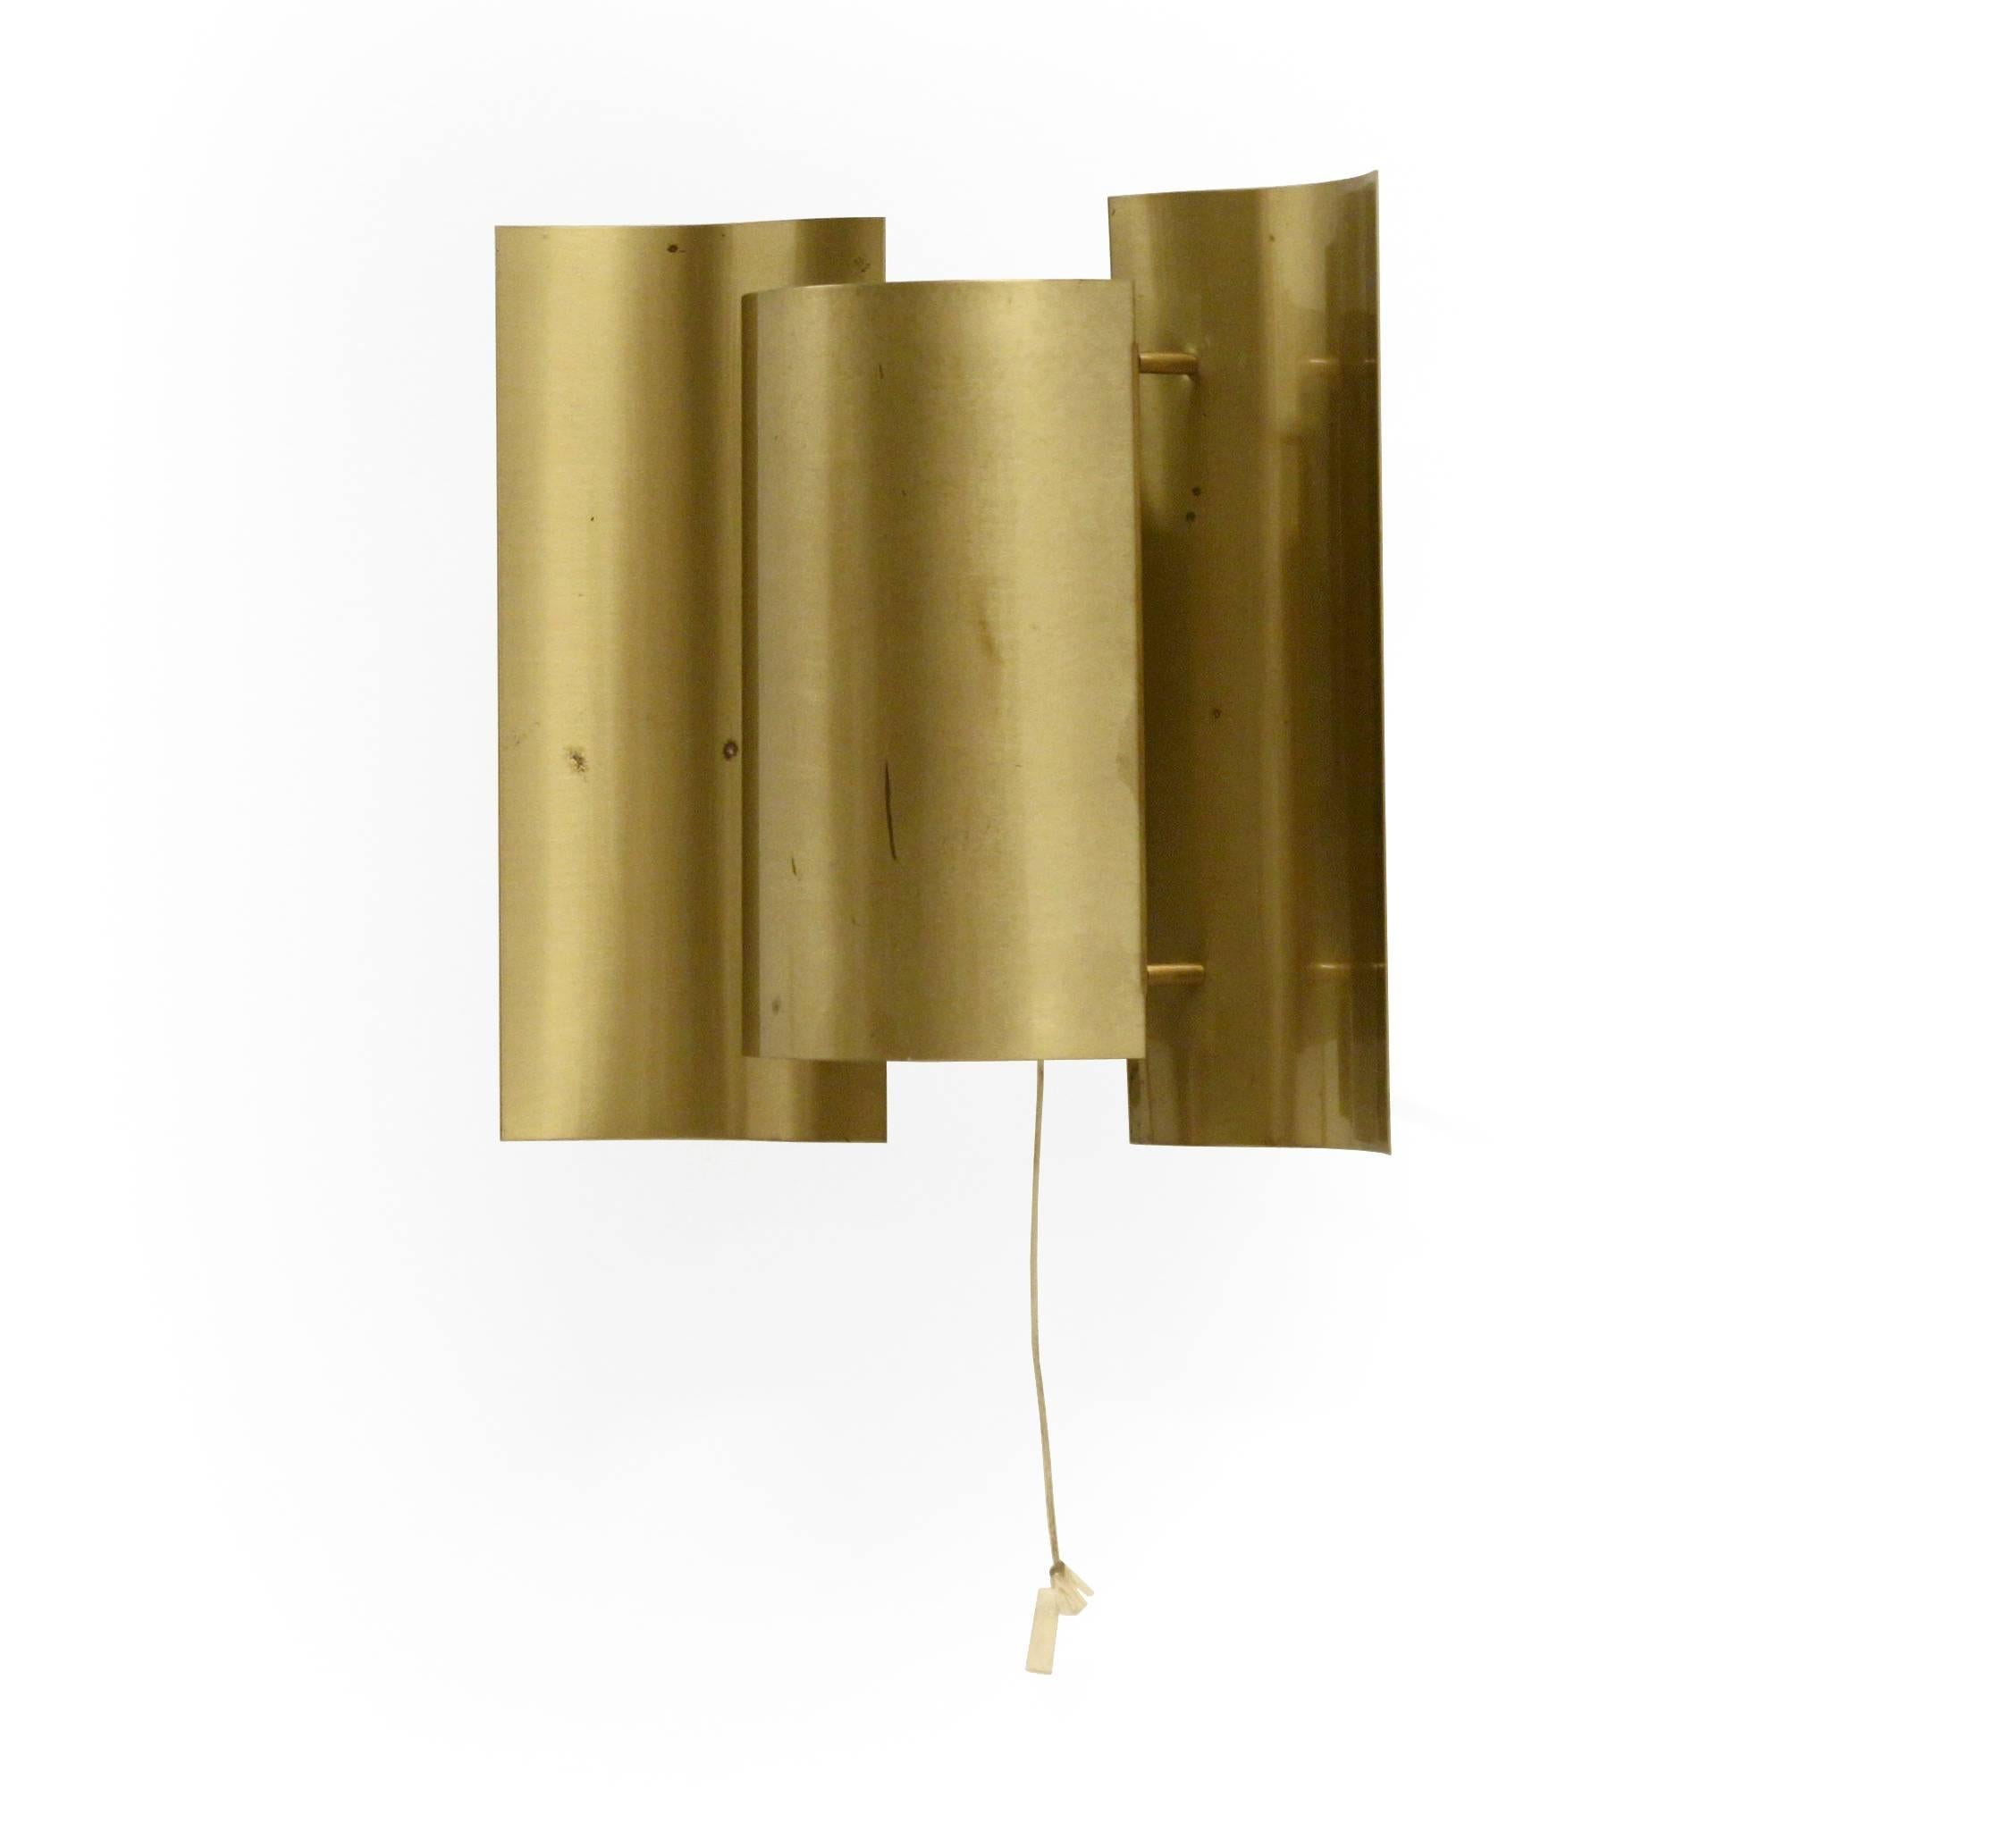 Modern and graceful wall sconces in brass. Designed by Sven Ivar Dysthe and made in Norway by Høvik Verk from 1968. All lights are fully working and in excellent vintage condition.